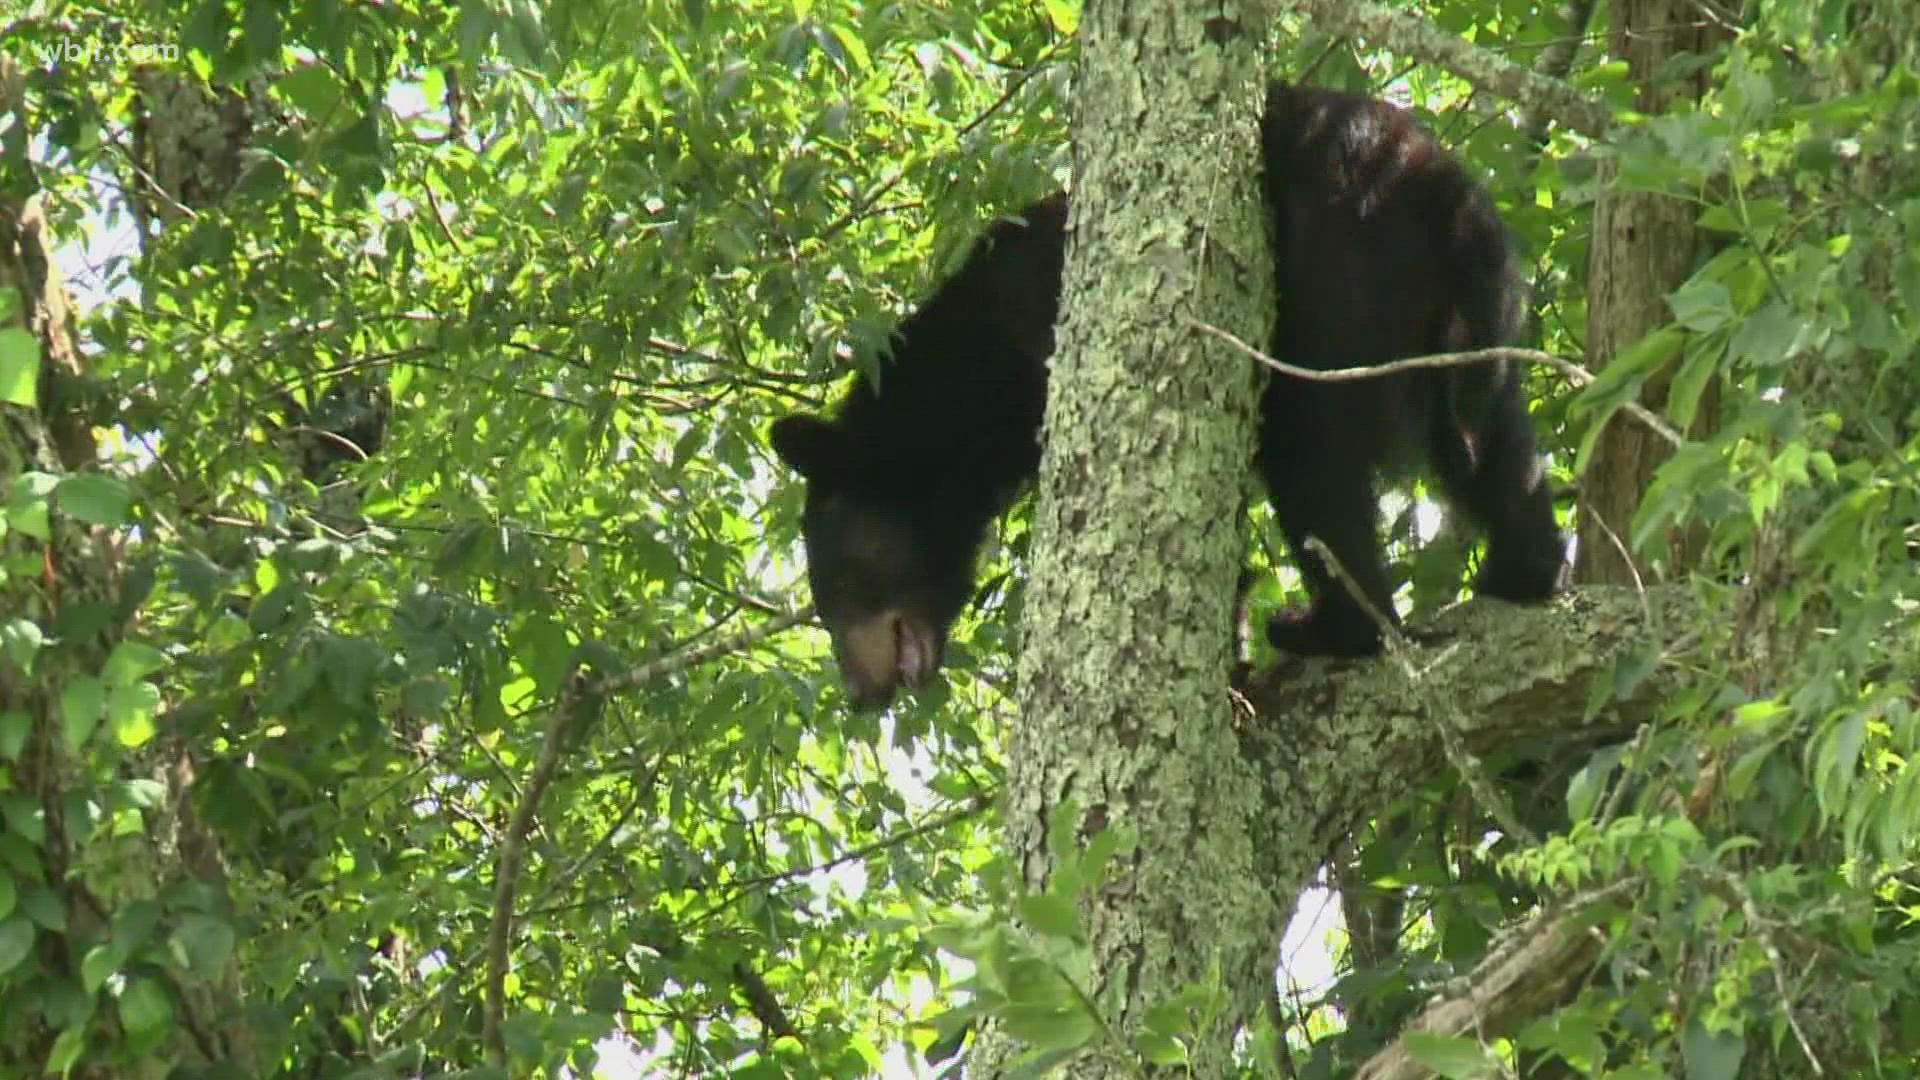 Last weekend a bear hurt a mom and her 3-year-old after it tore into the family's tent in search of food at the Elkmont campground and scratched them.